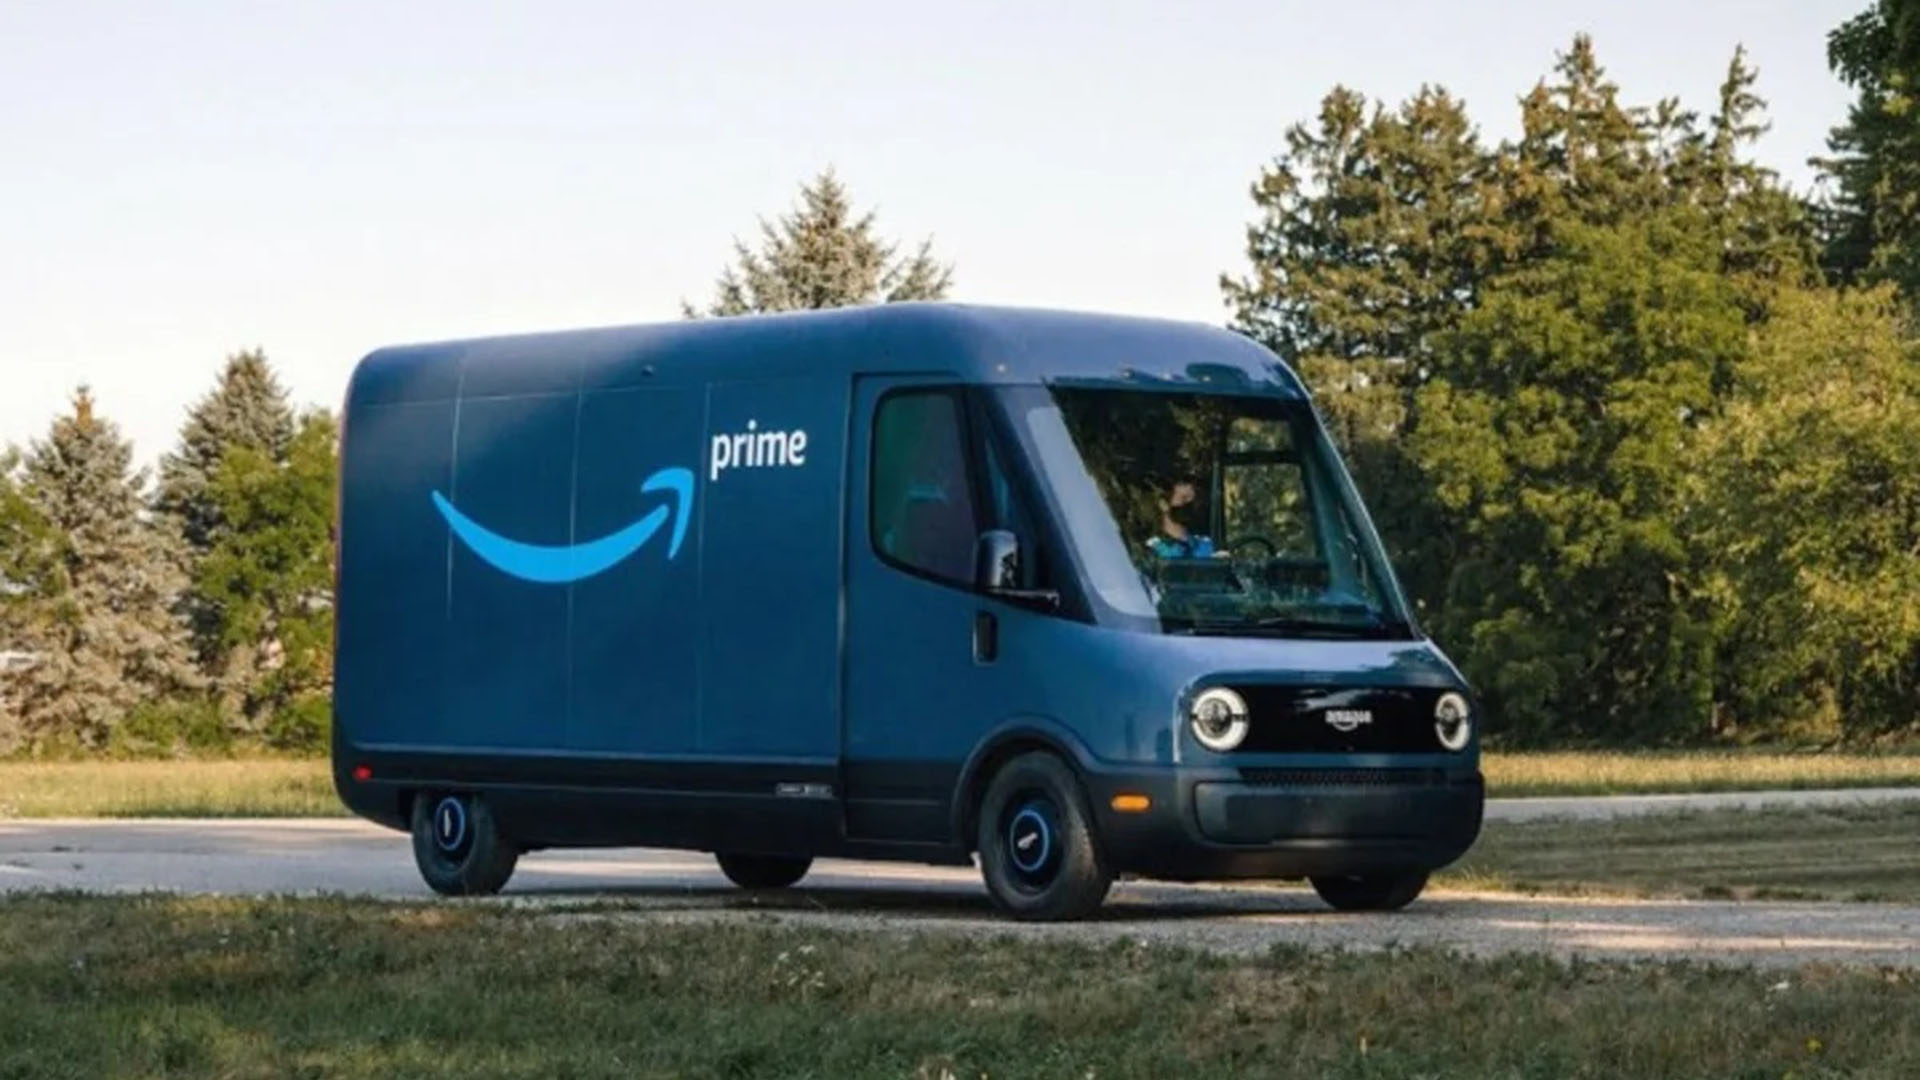 Rivian secured financing from Jeff Bezos and Amazon by selling him a gigantic fleet of electric delivery vans